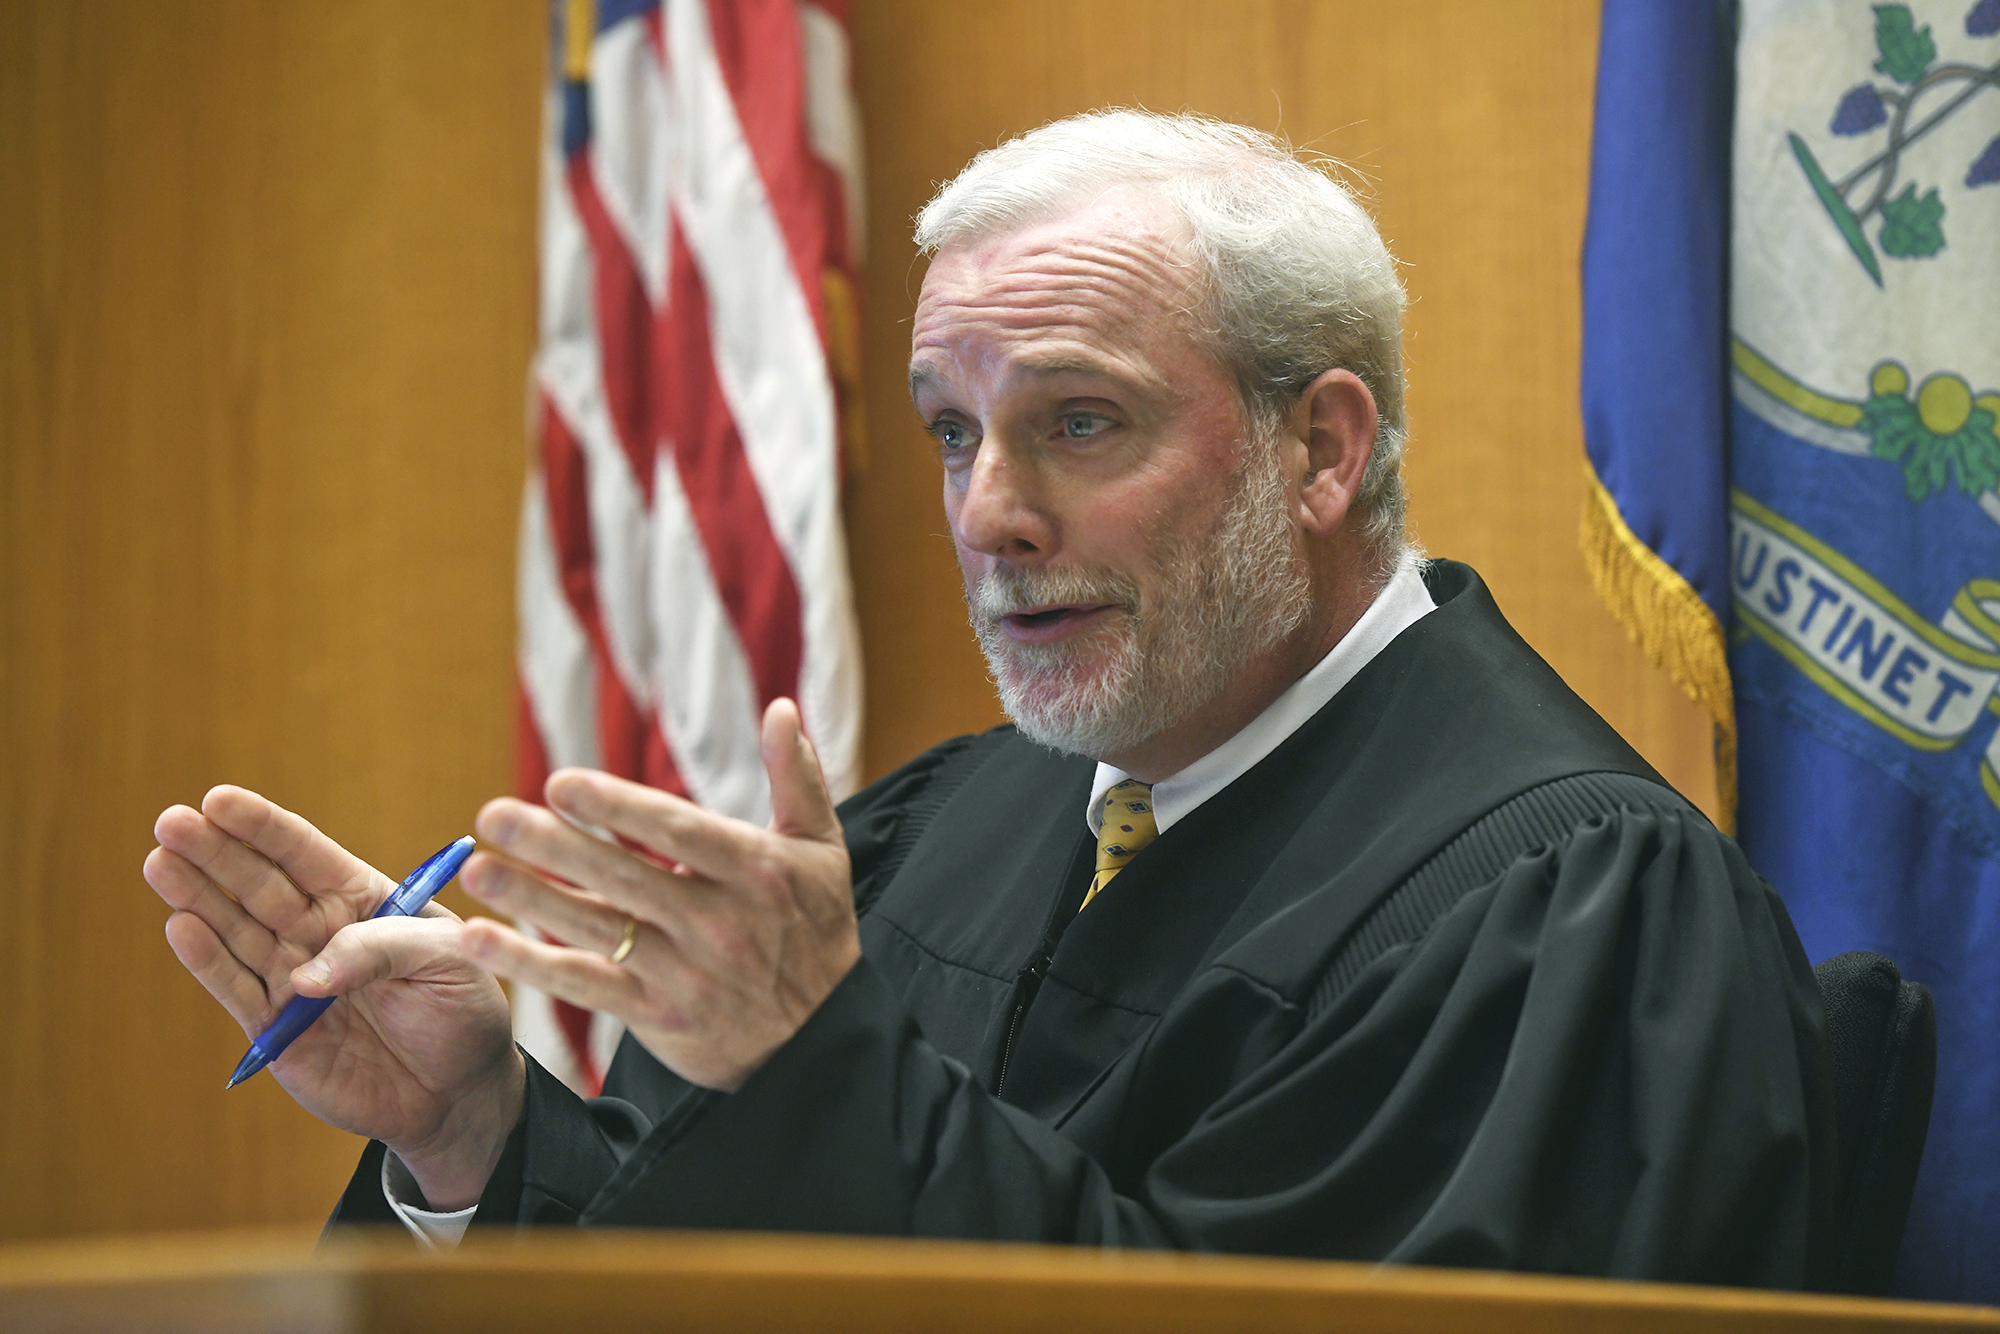 Judge overturns primary election due to ‘shocking’ evidence of fraud.